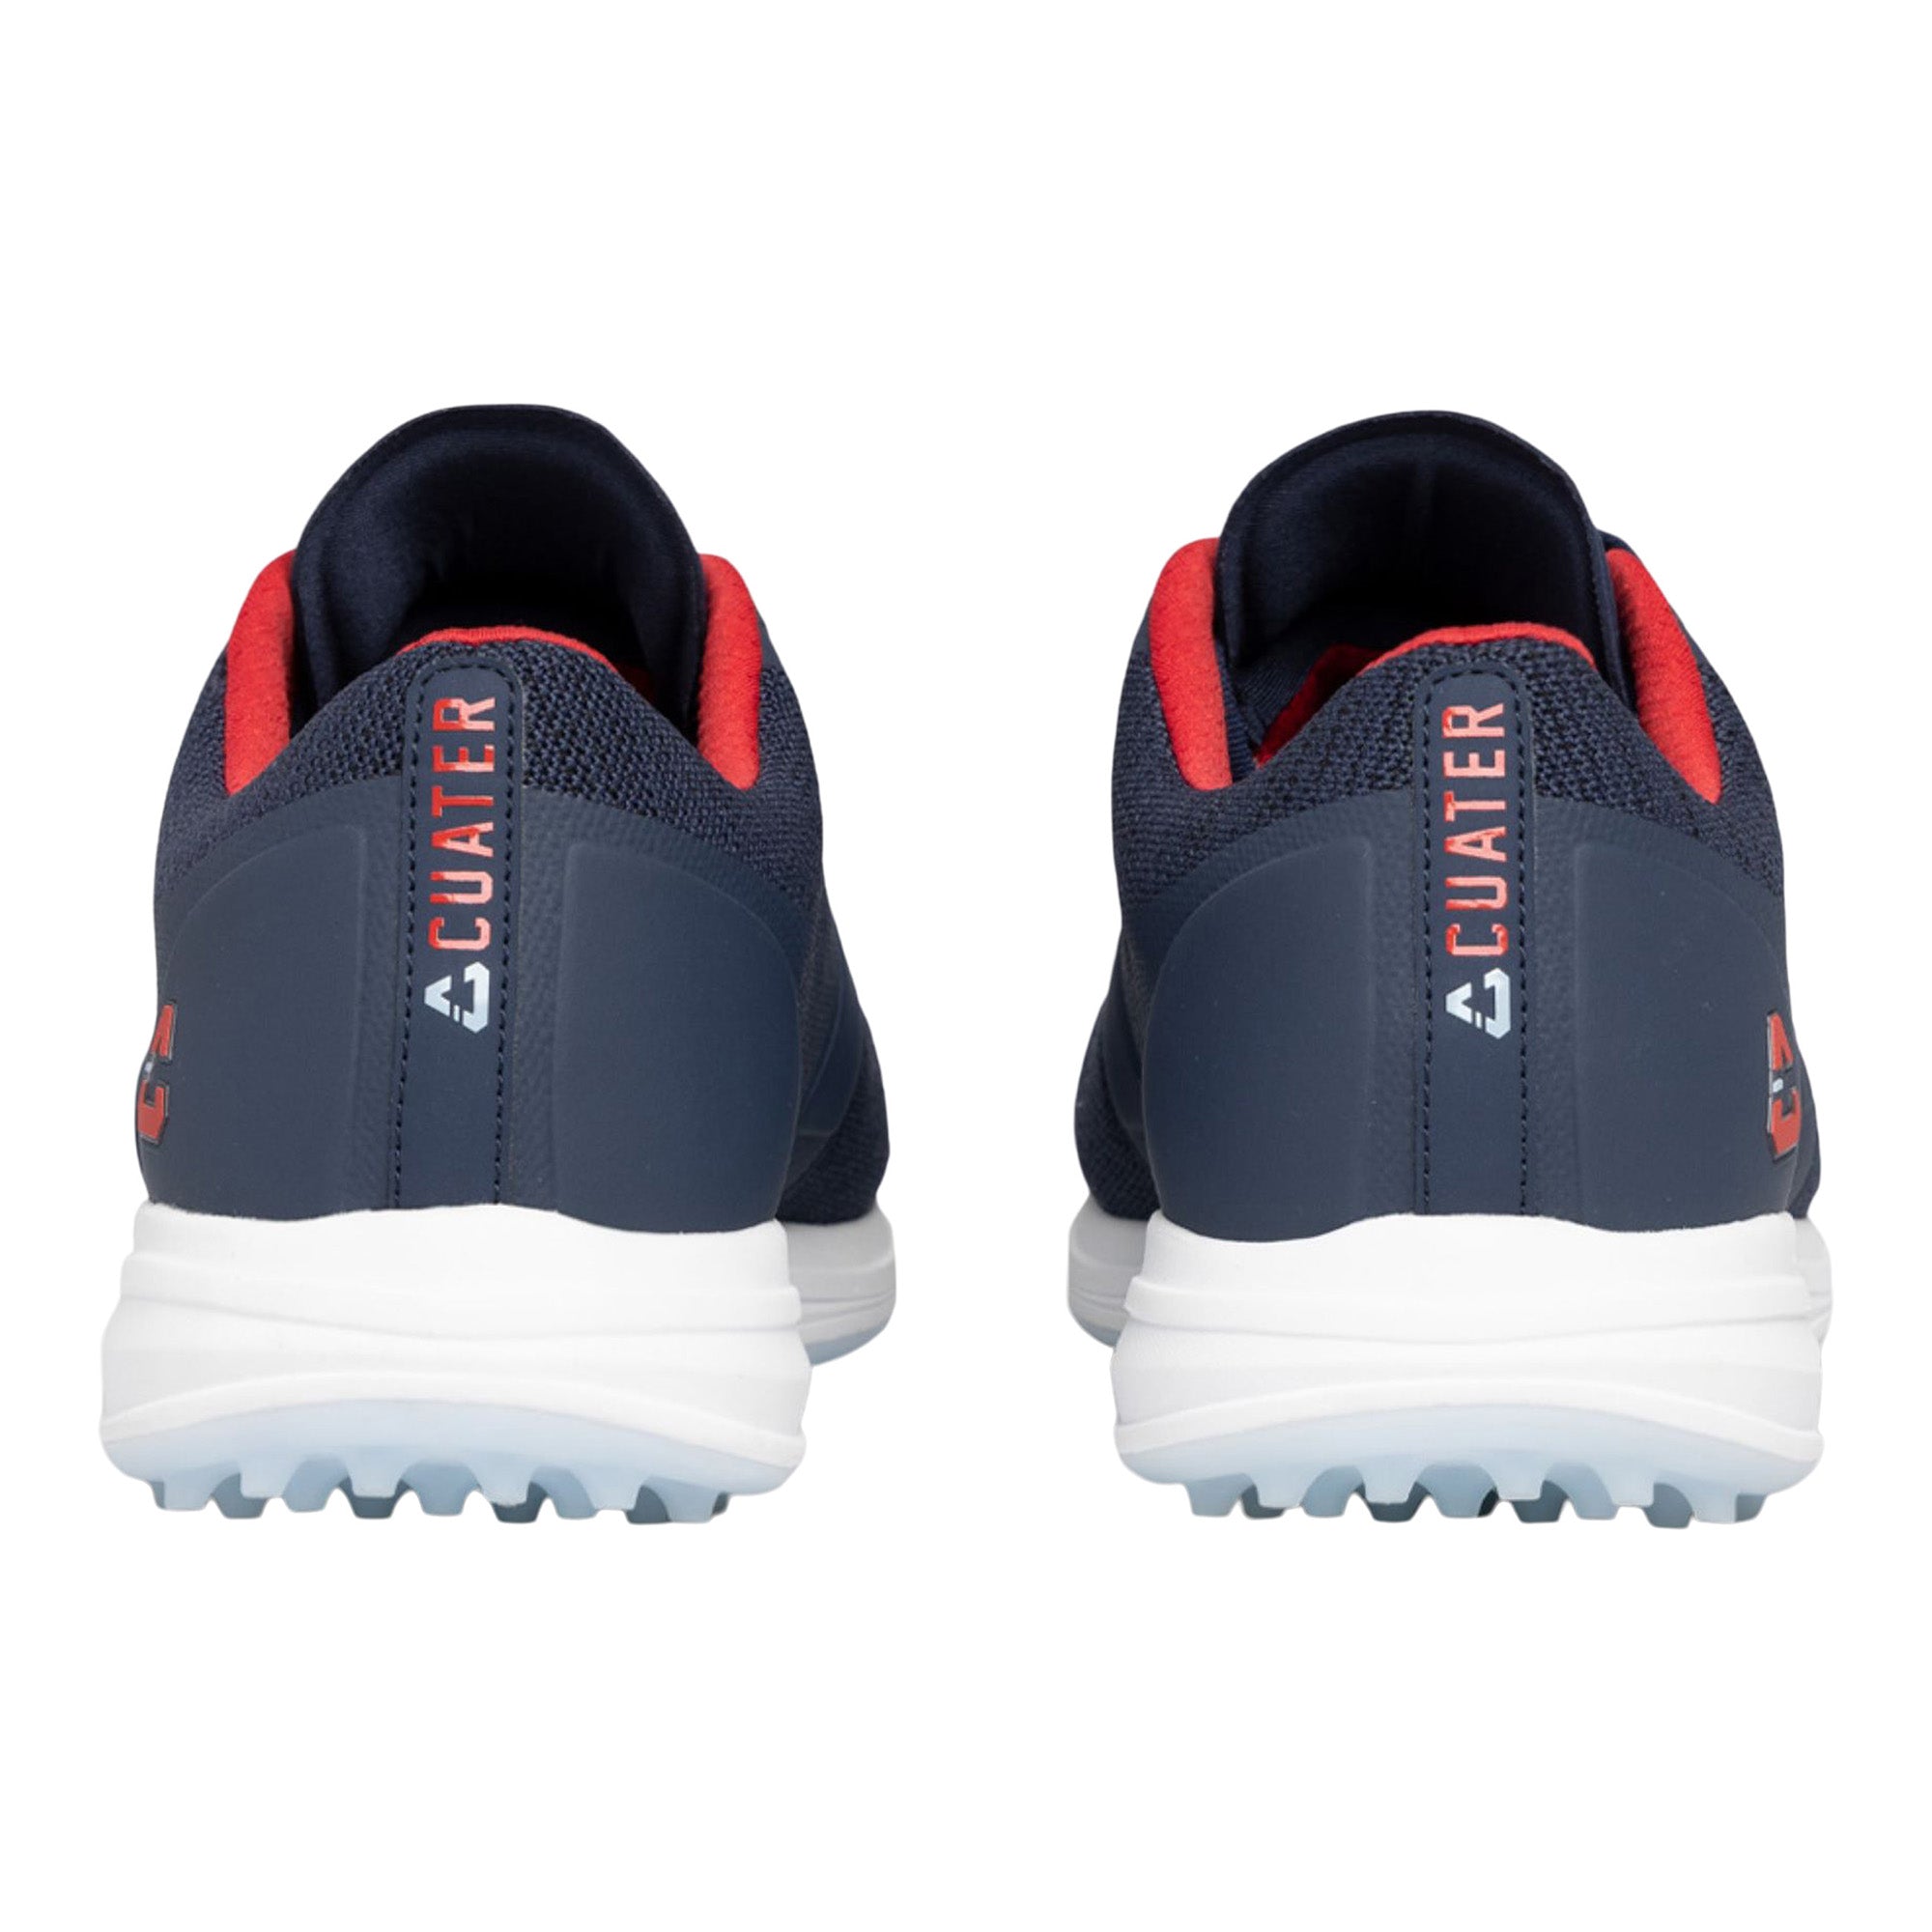 cuater-the-money-maker-golf-shoes-4mr216-navy-red-function18